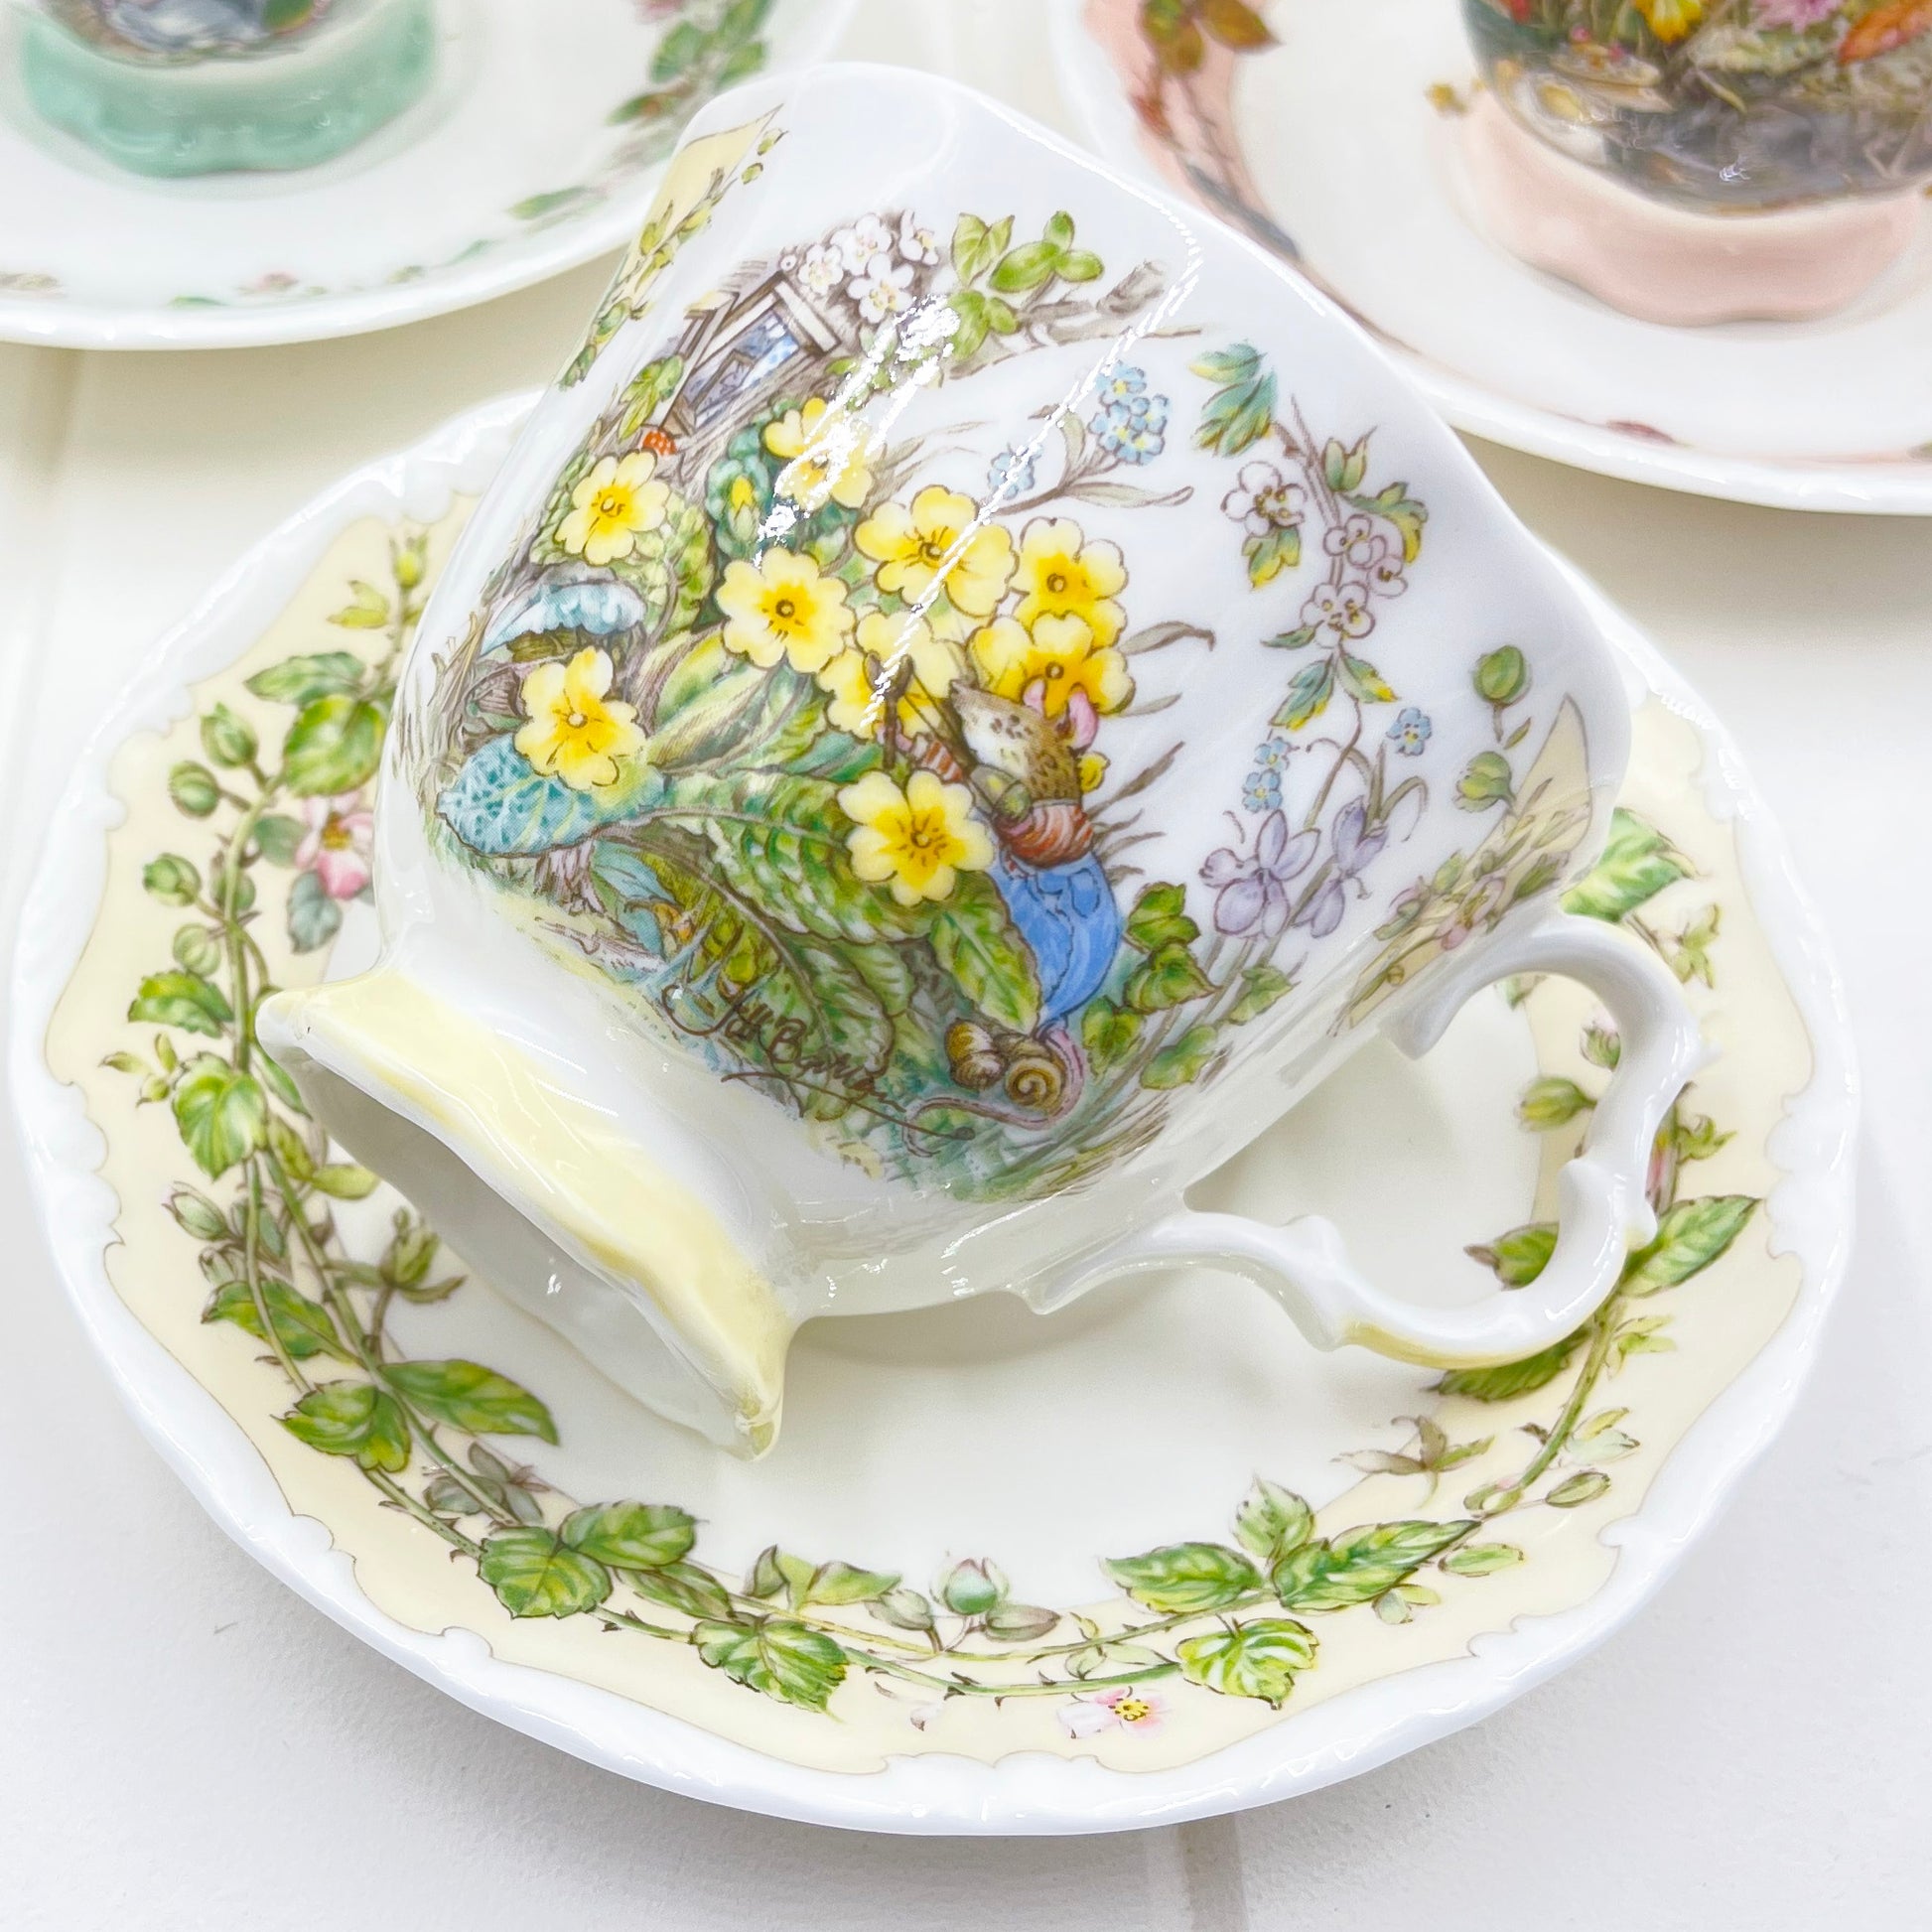 Royal Doulton Brambly Hedge Four Seasons Cup and Saucer - Summer